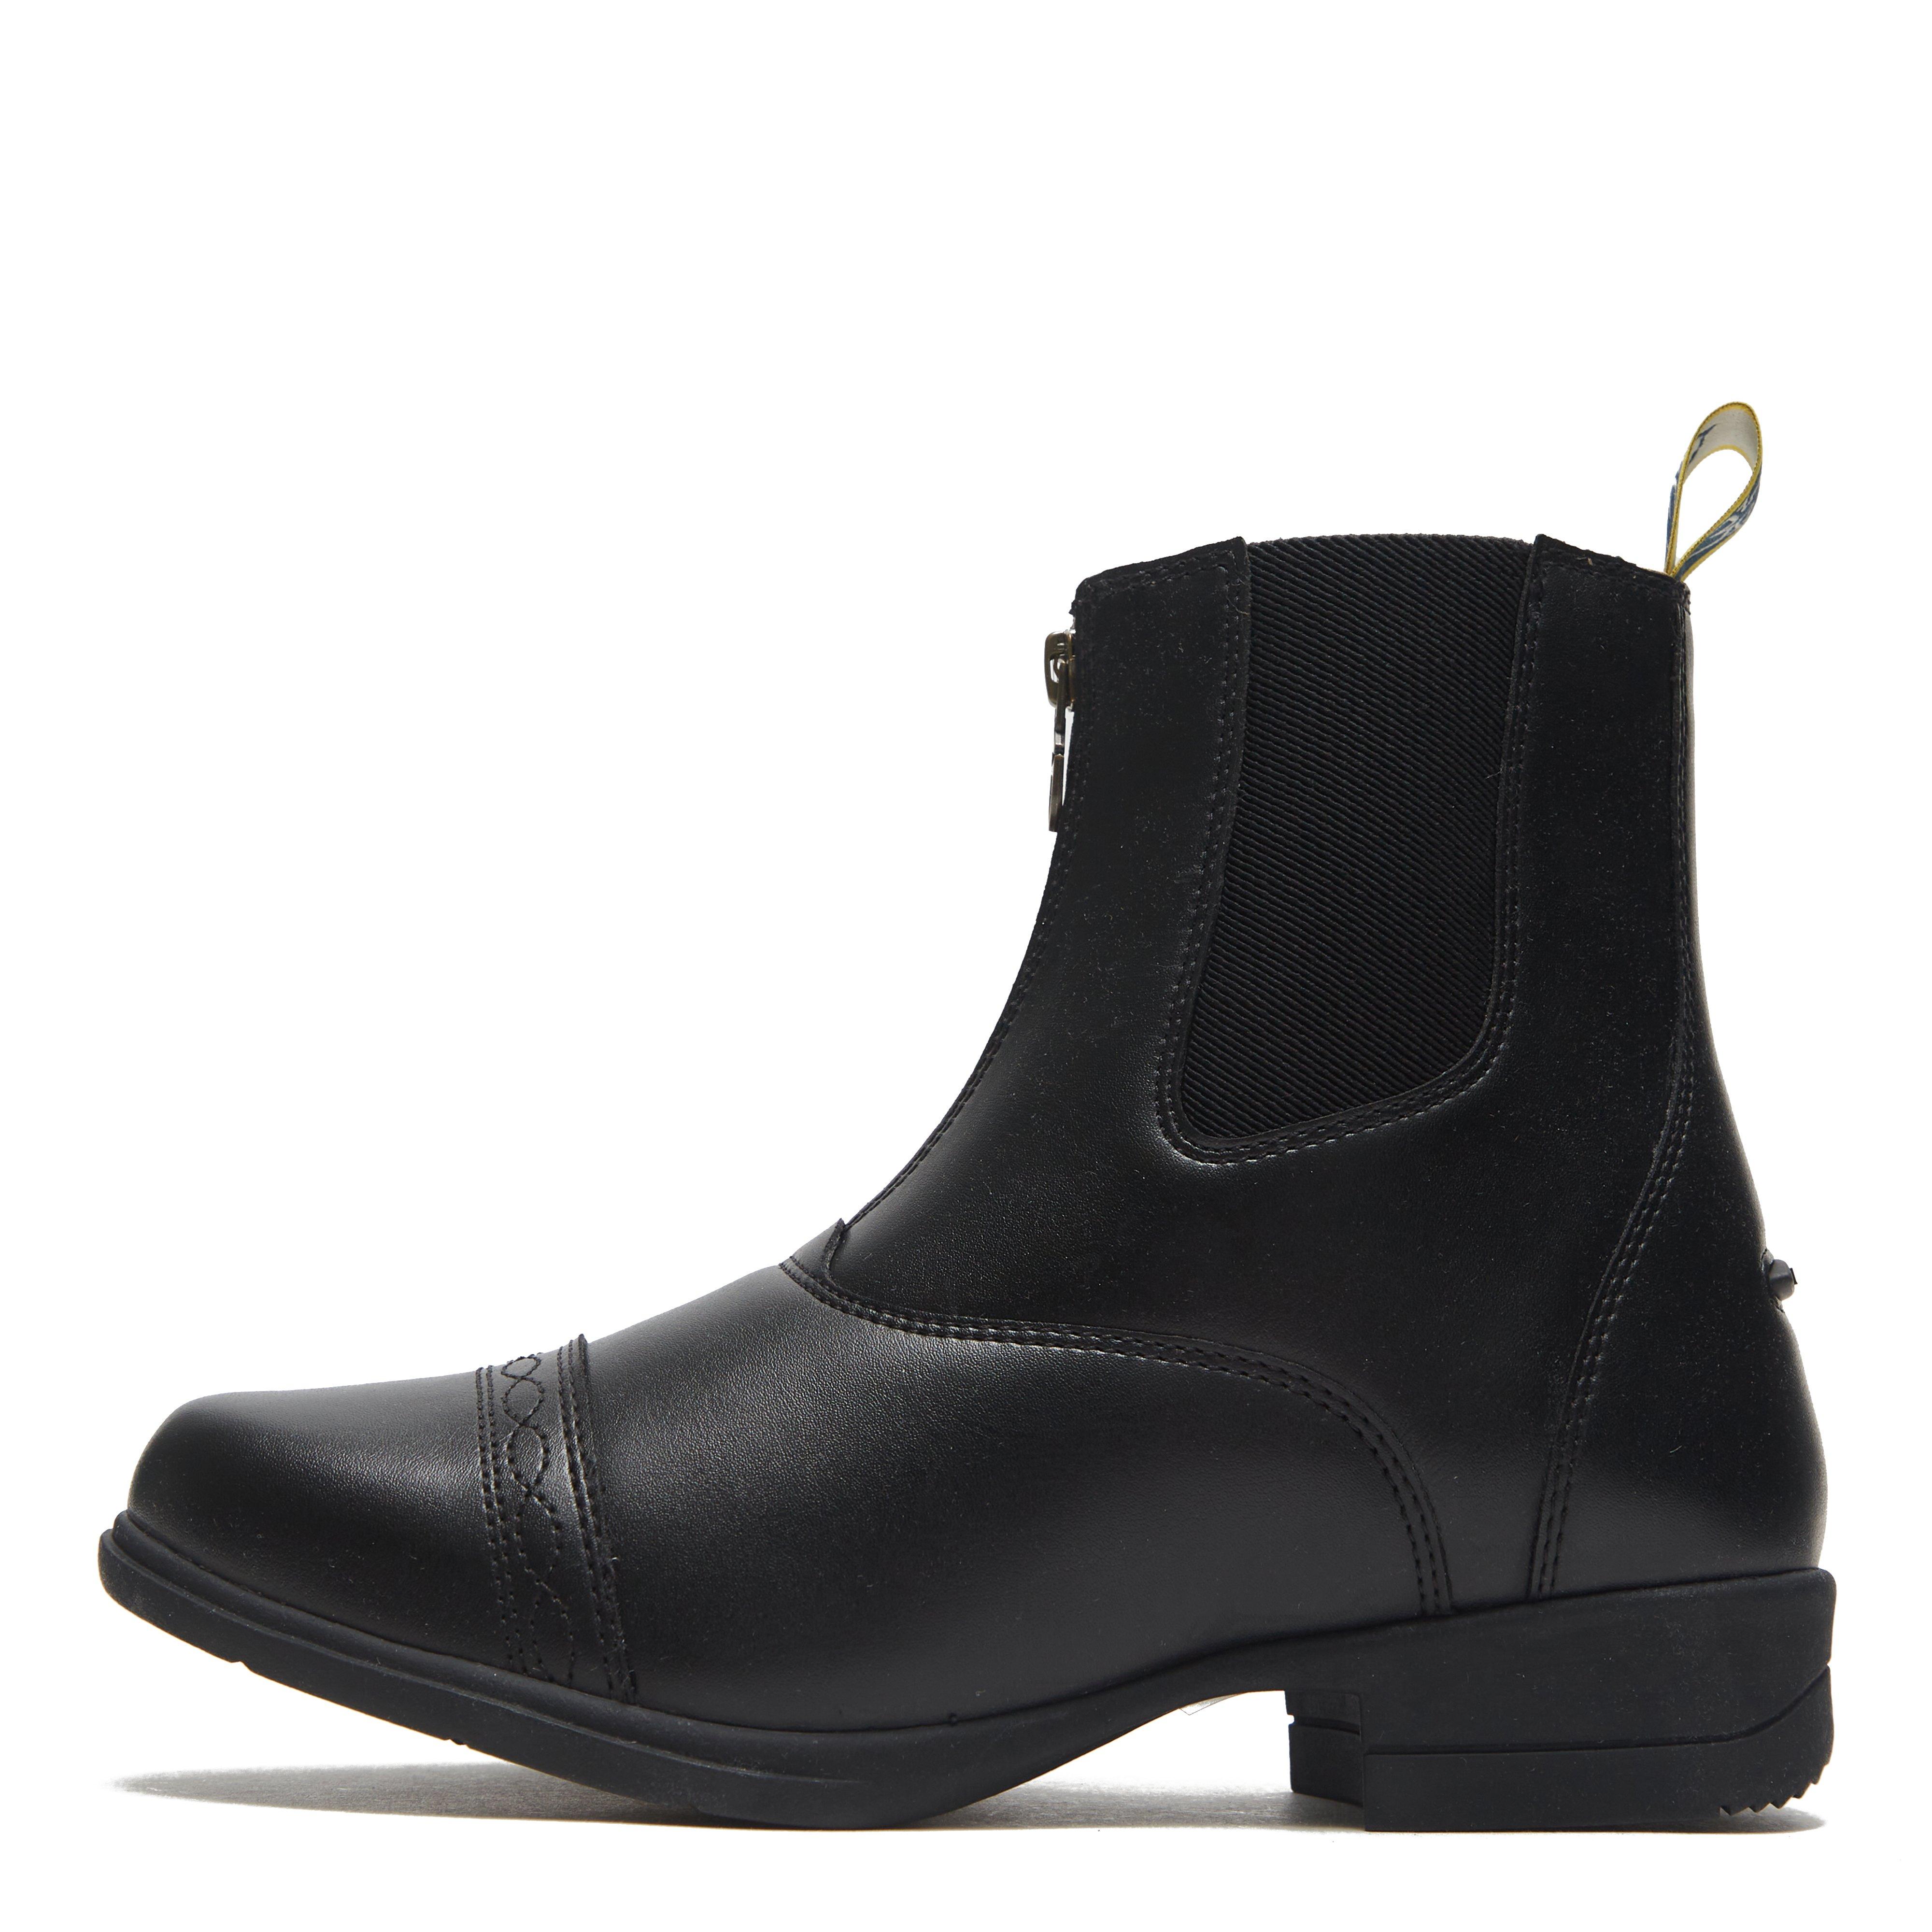 Adults Clio Paddock Boots Black